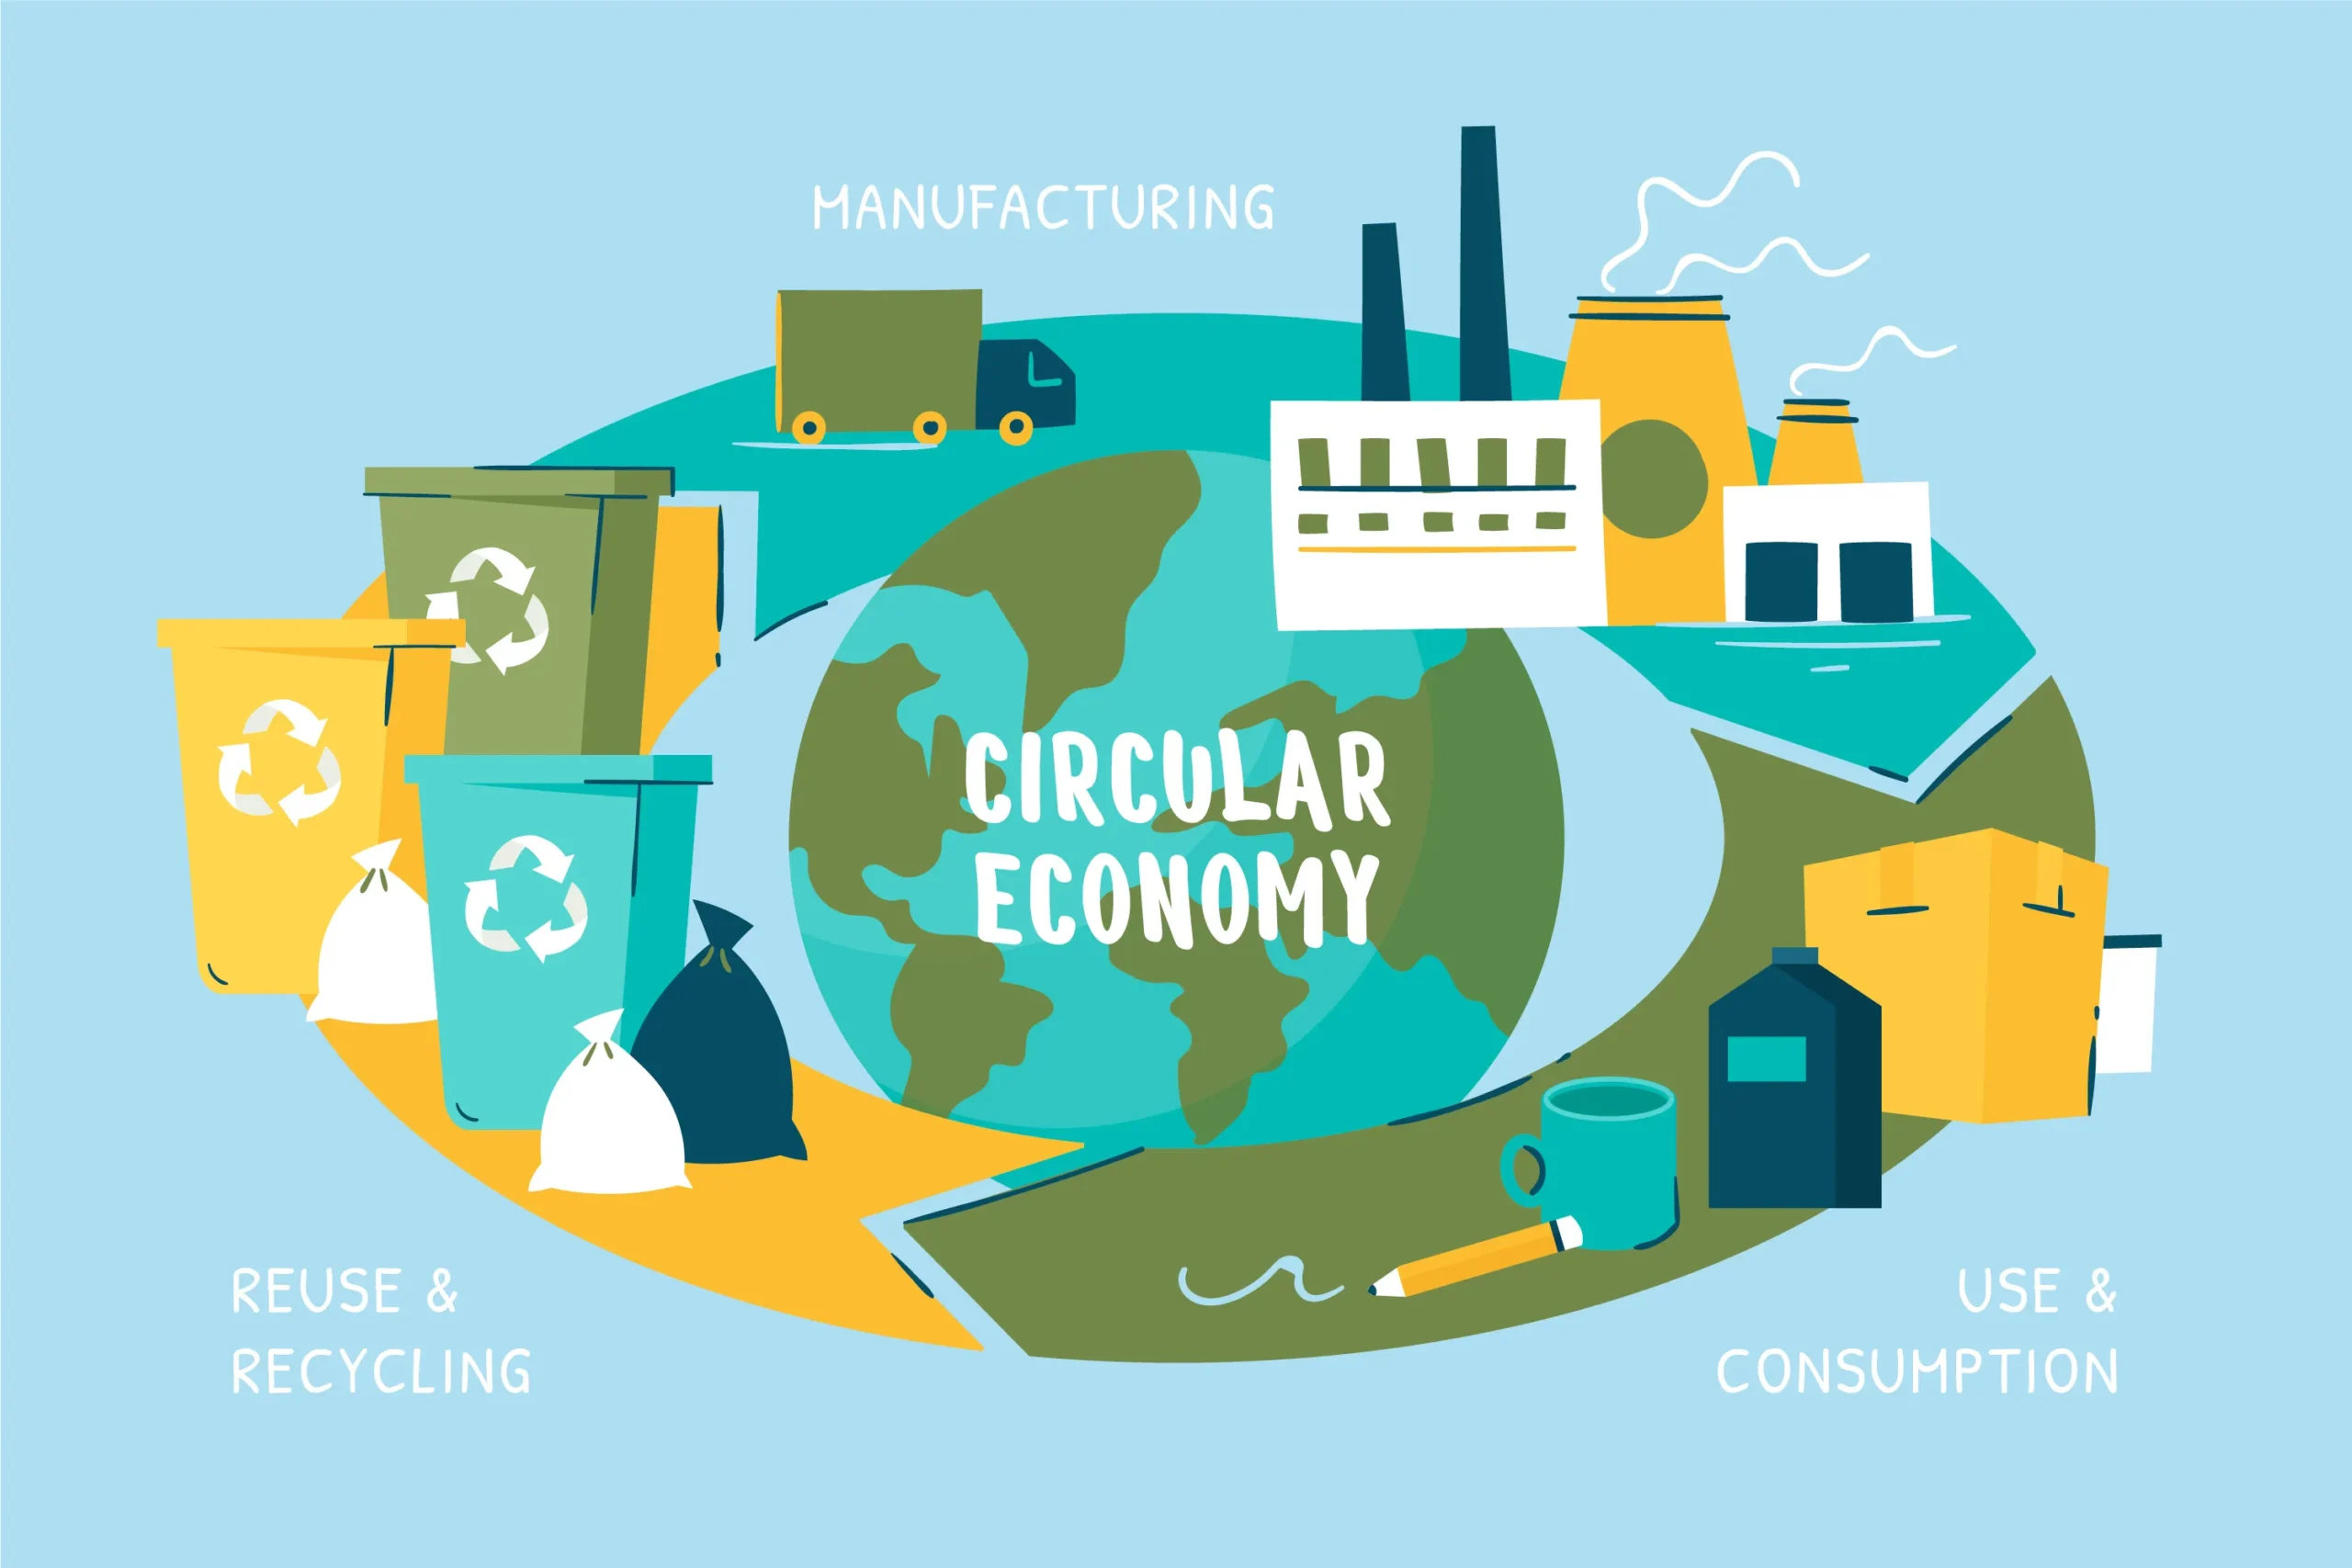 Illustration of a circular economy model with recycle bins, factory, and consumer goods on a global backdrop, endorsed by JOH Partners for sustainable business innovation.